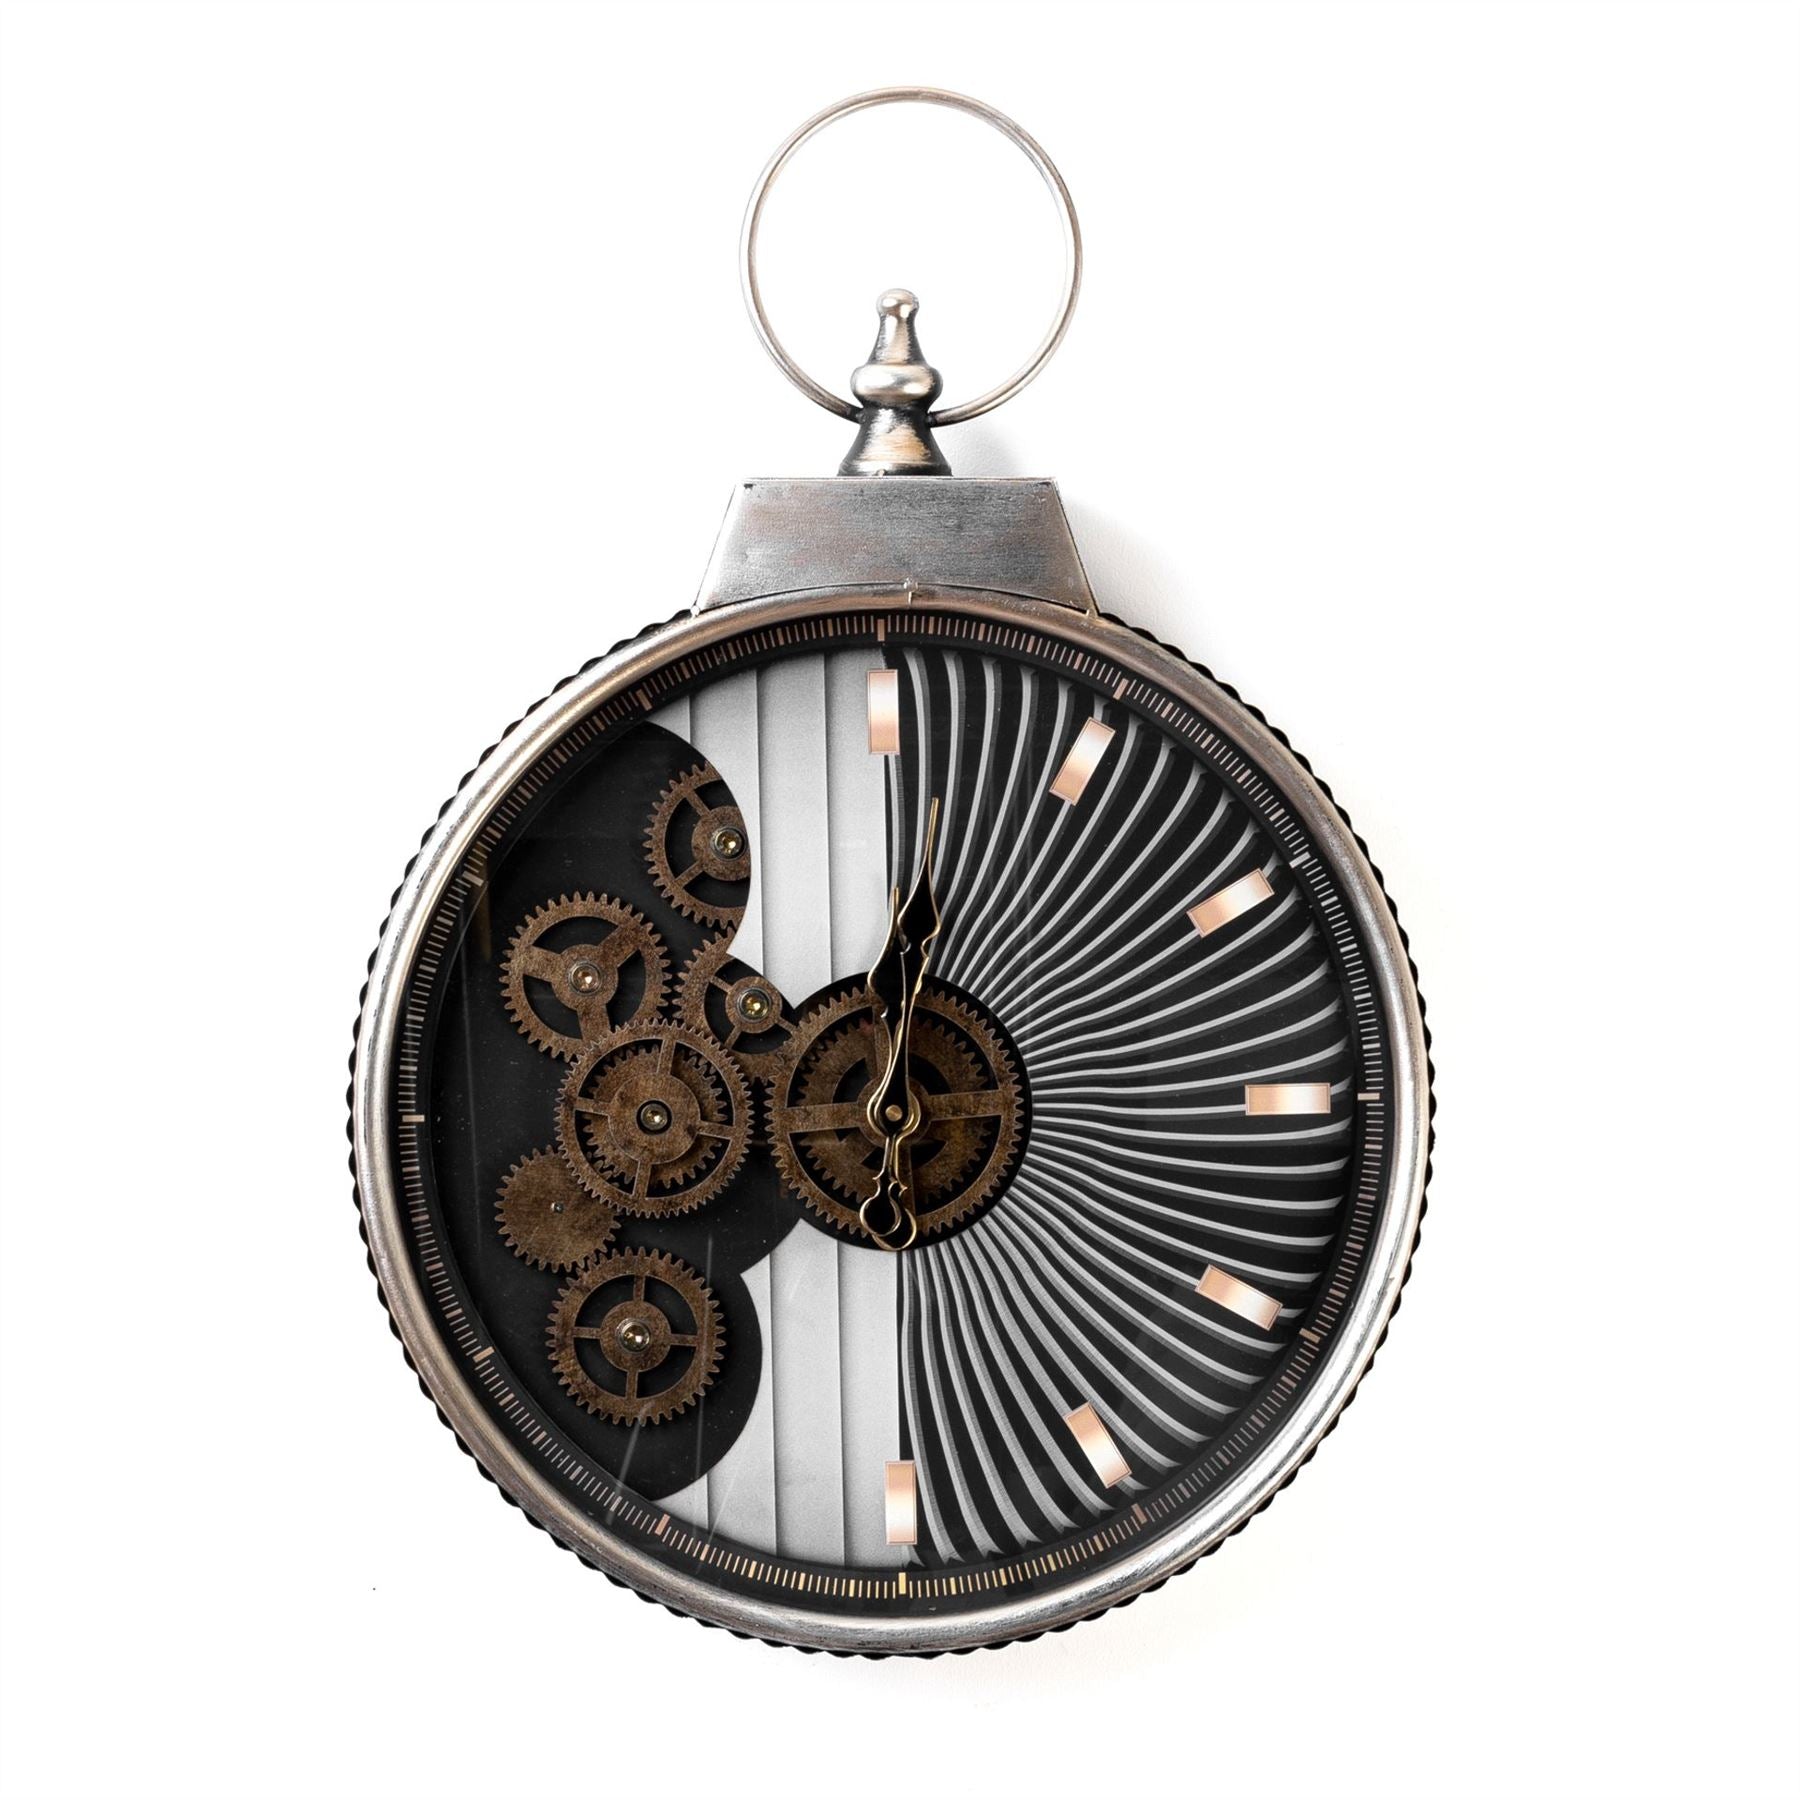 Wm Widdop Stop Watch Style Wall Clock with Moving Gears 70cm